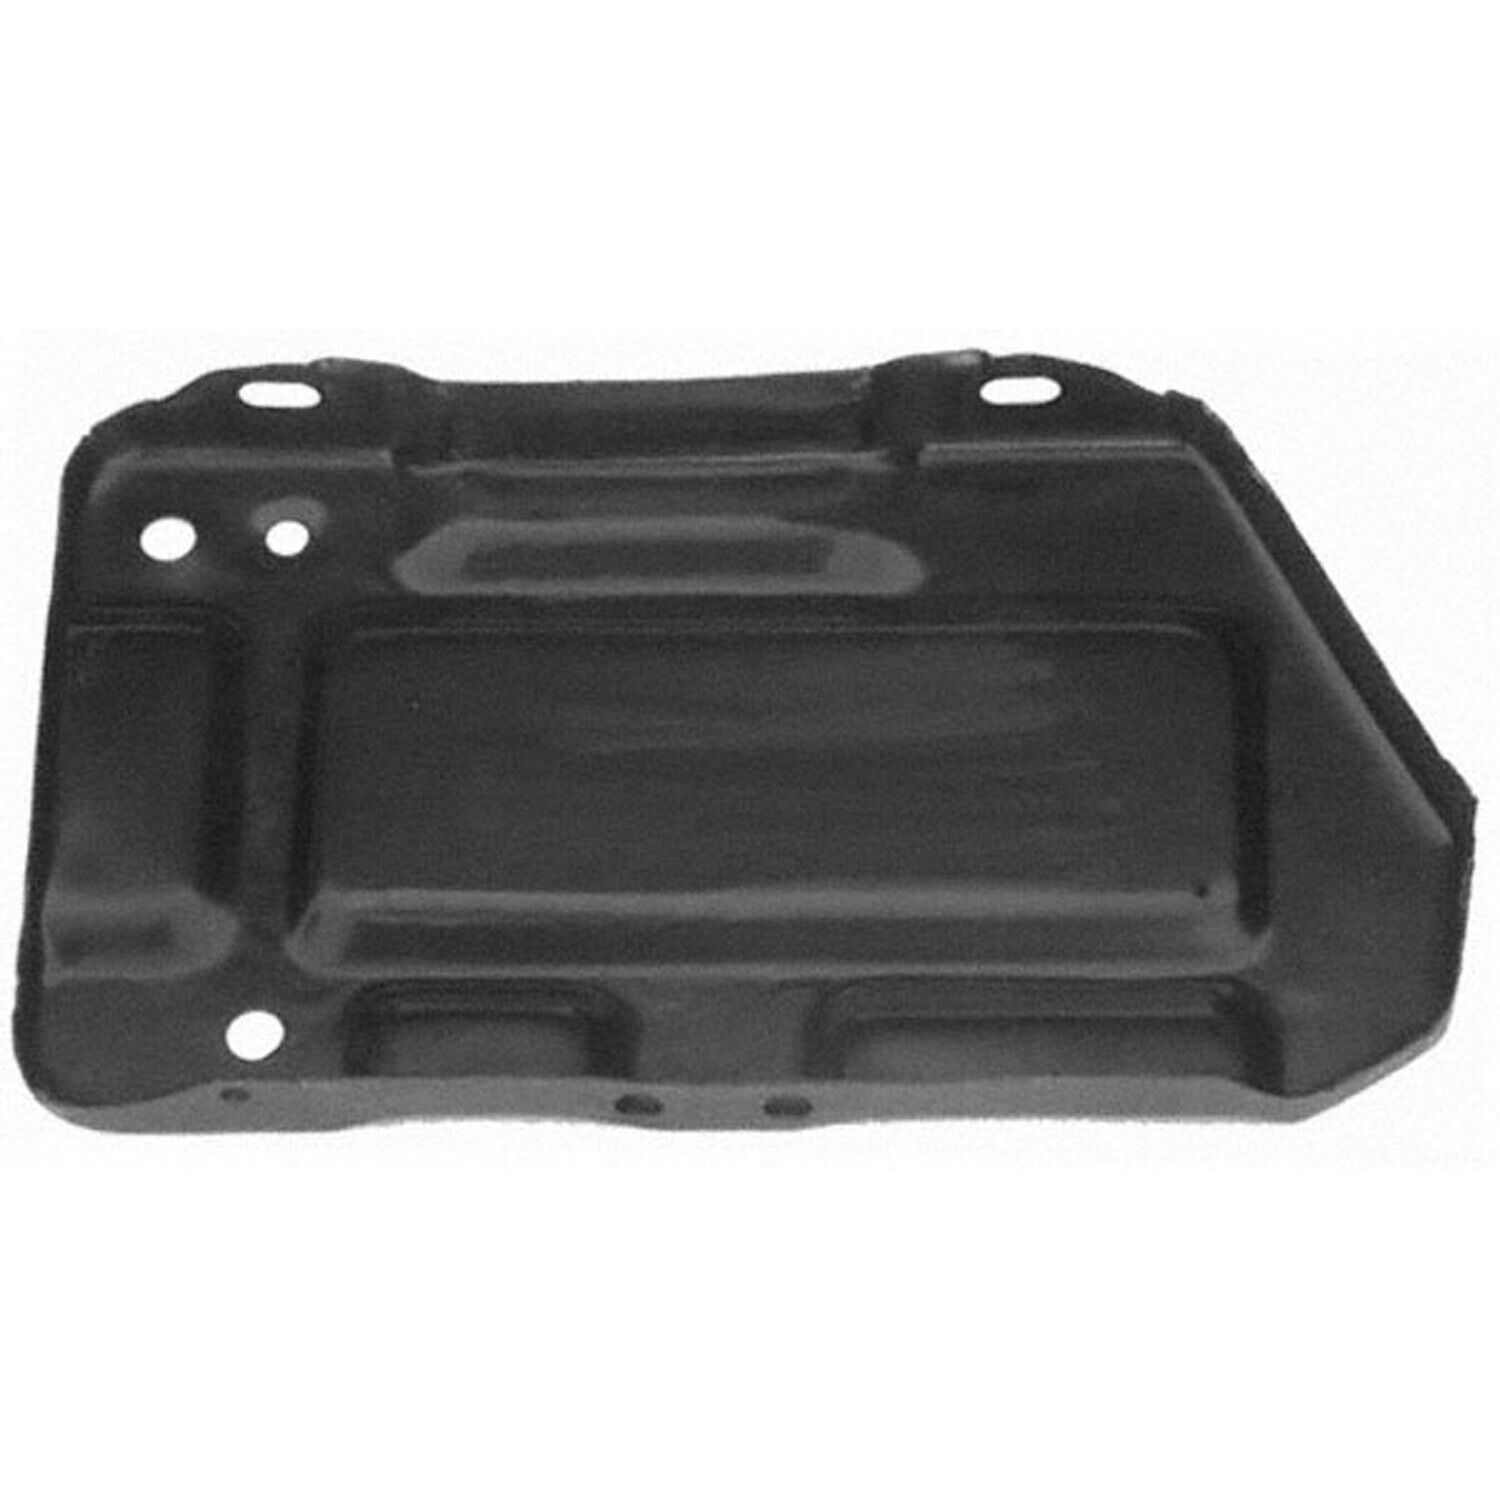 Black Battery Tray fits 1967-1969 Plymouth Barracuda 2111-300-67